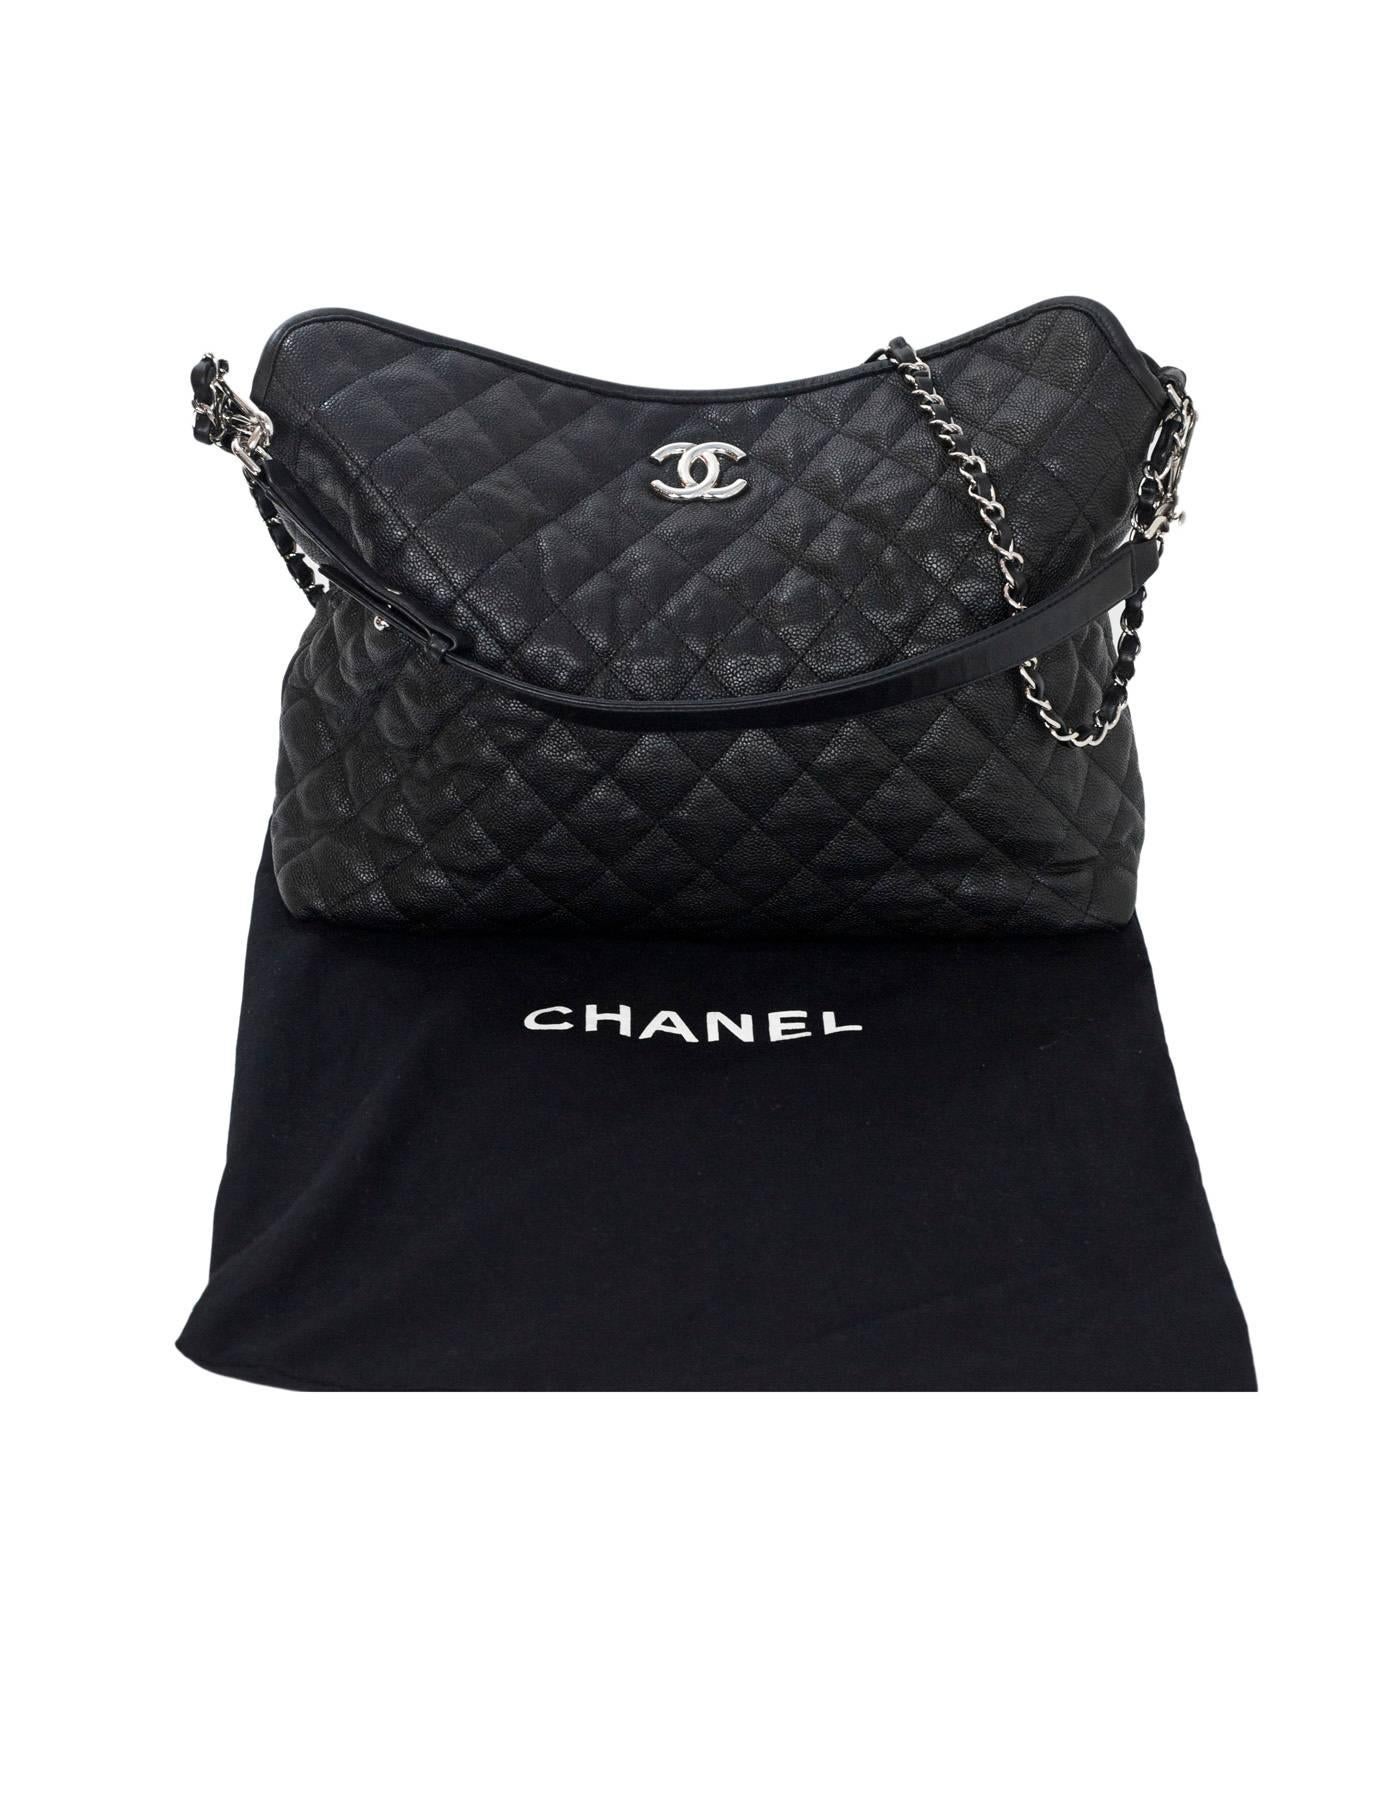 Chanel Black Quilted Caviar Leather French Riviera Hobo Bag w. Srrap 4